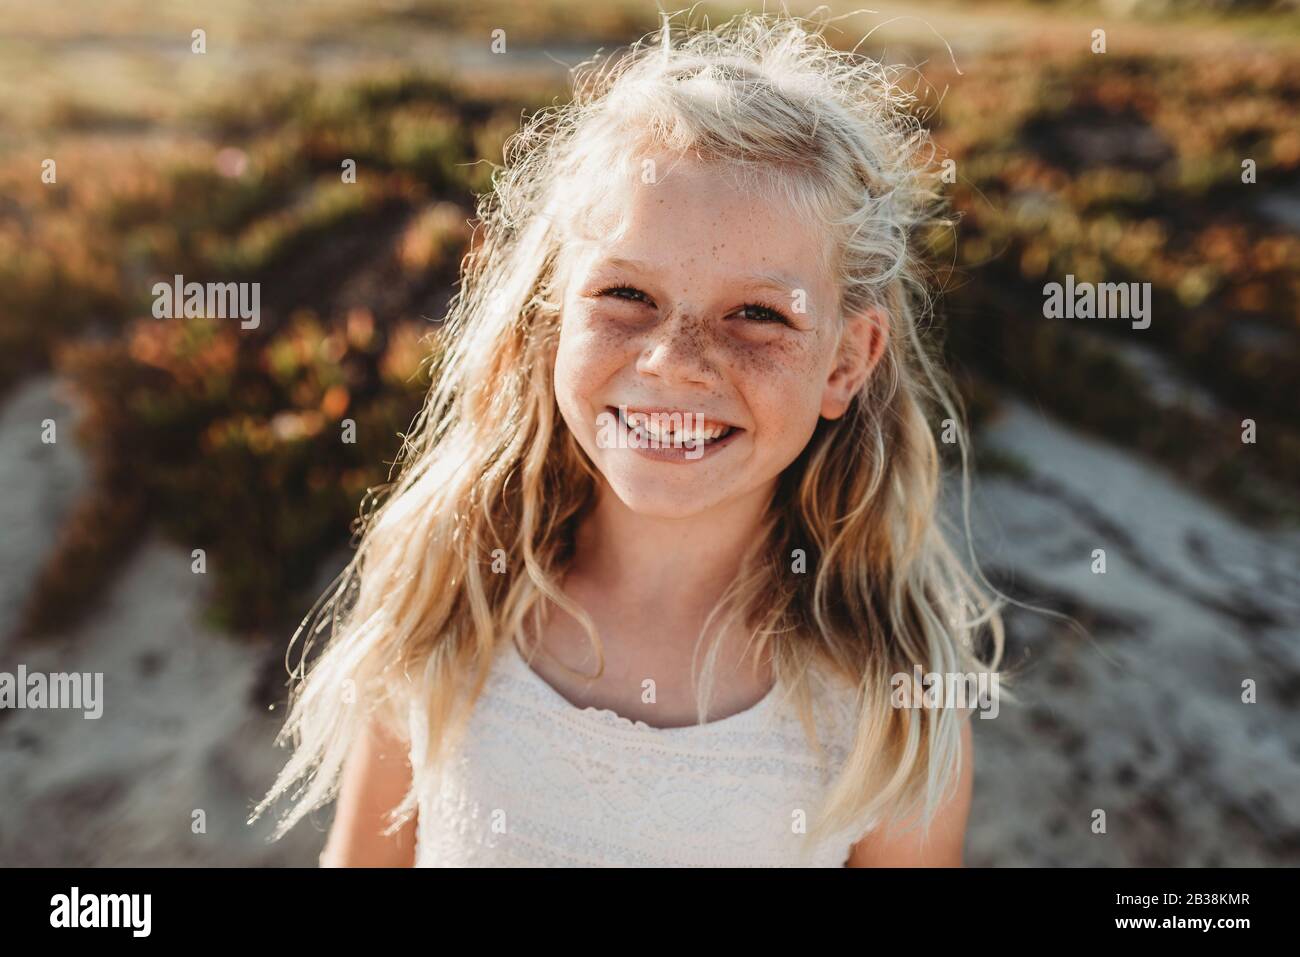 Portrait of young school age girl with freckles smiling at camera Stock Photo